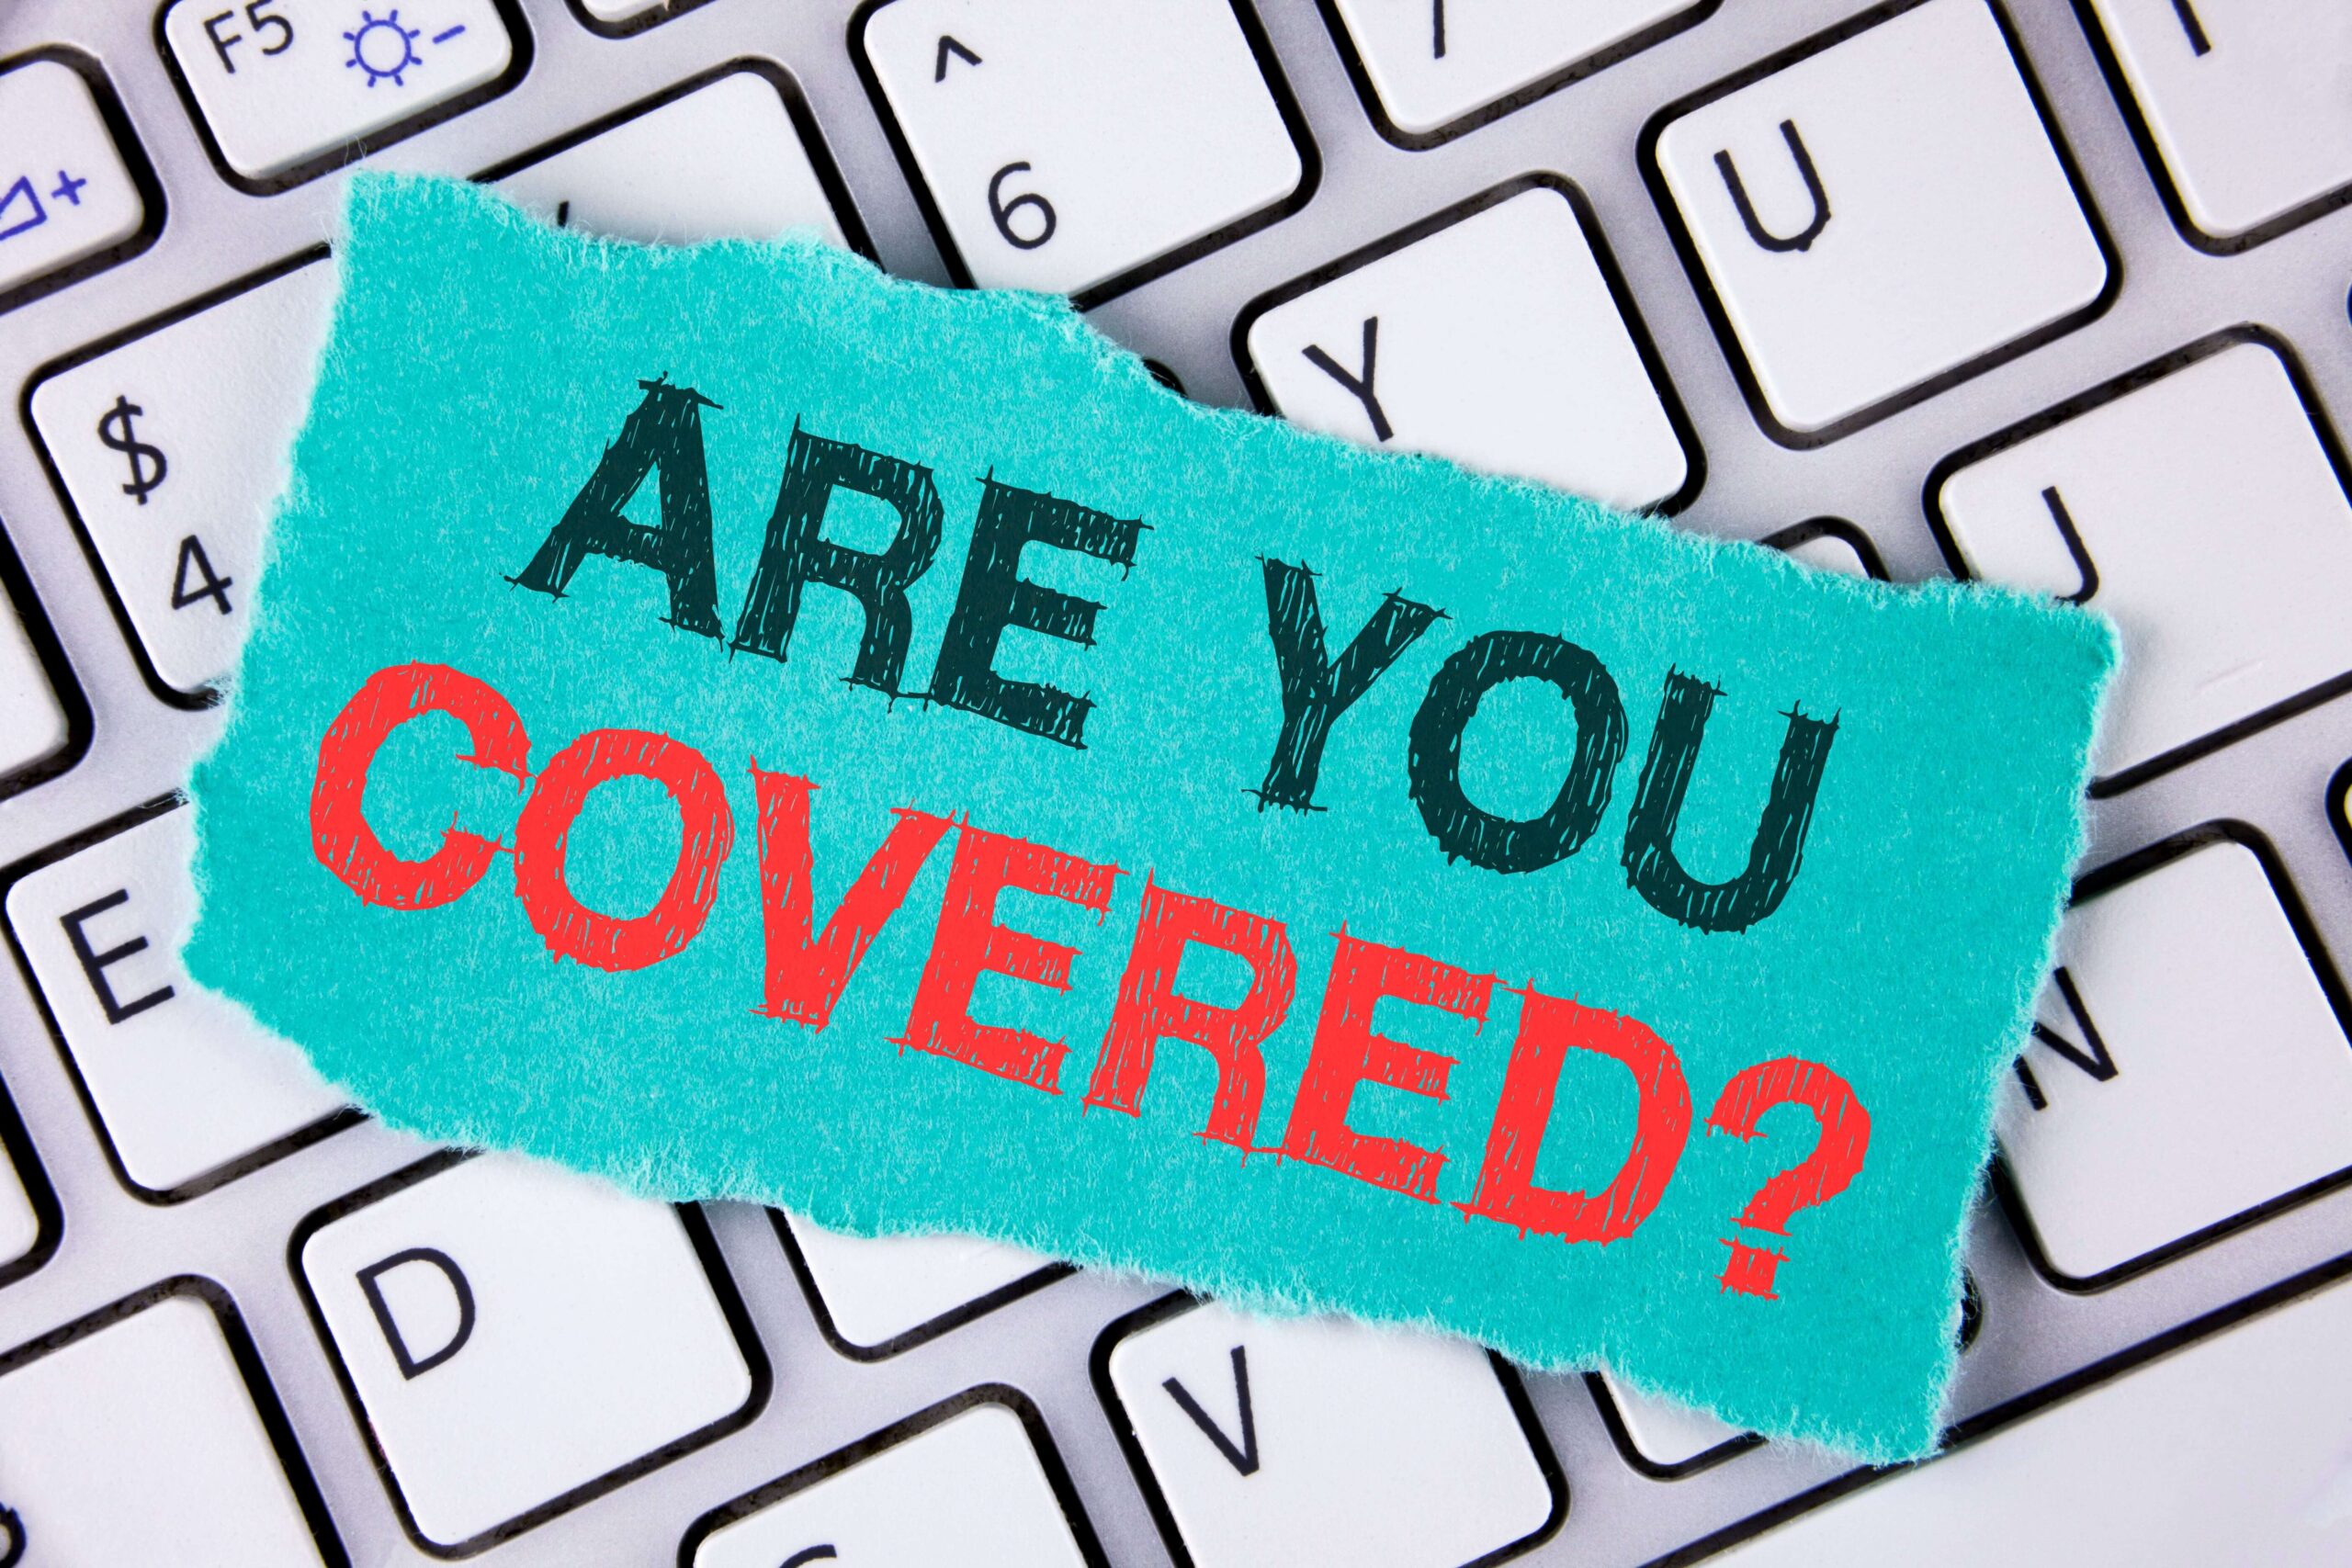 a label on a keyboard that reads "Are You Covered?"